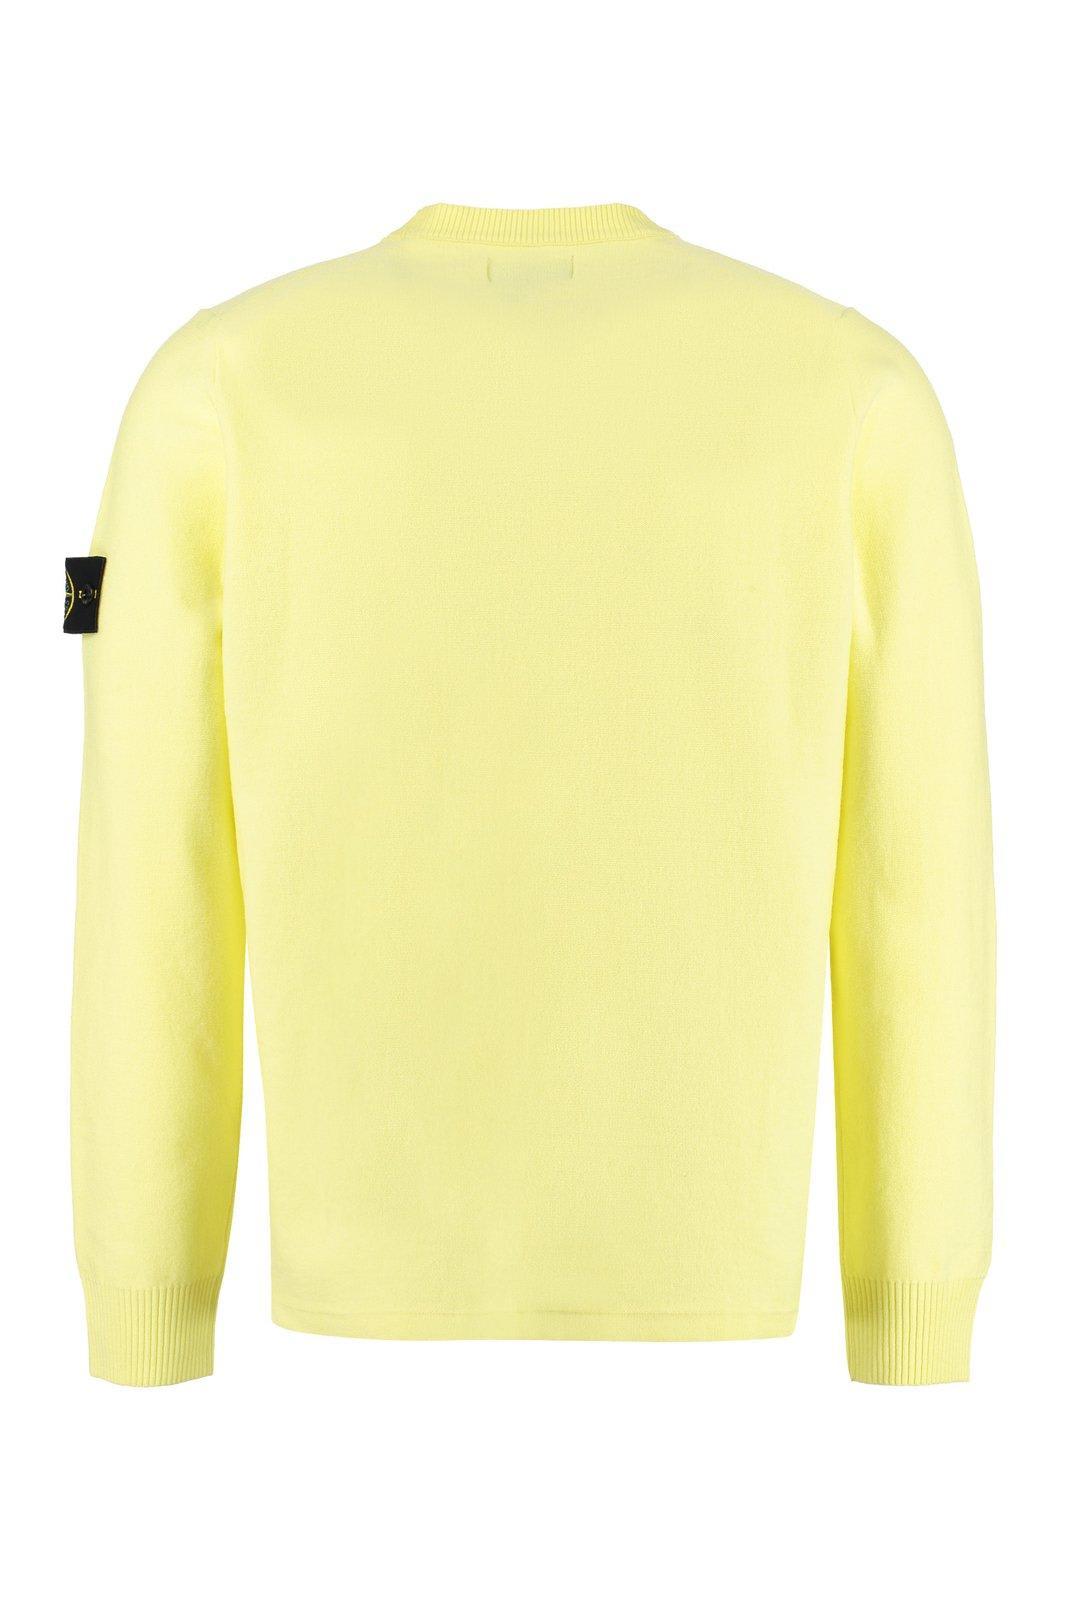 Stone Island Wool-blend Crew-neck Sweater in Yellow for Men | Lyst